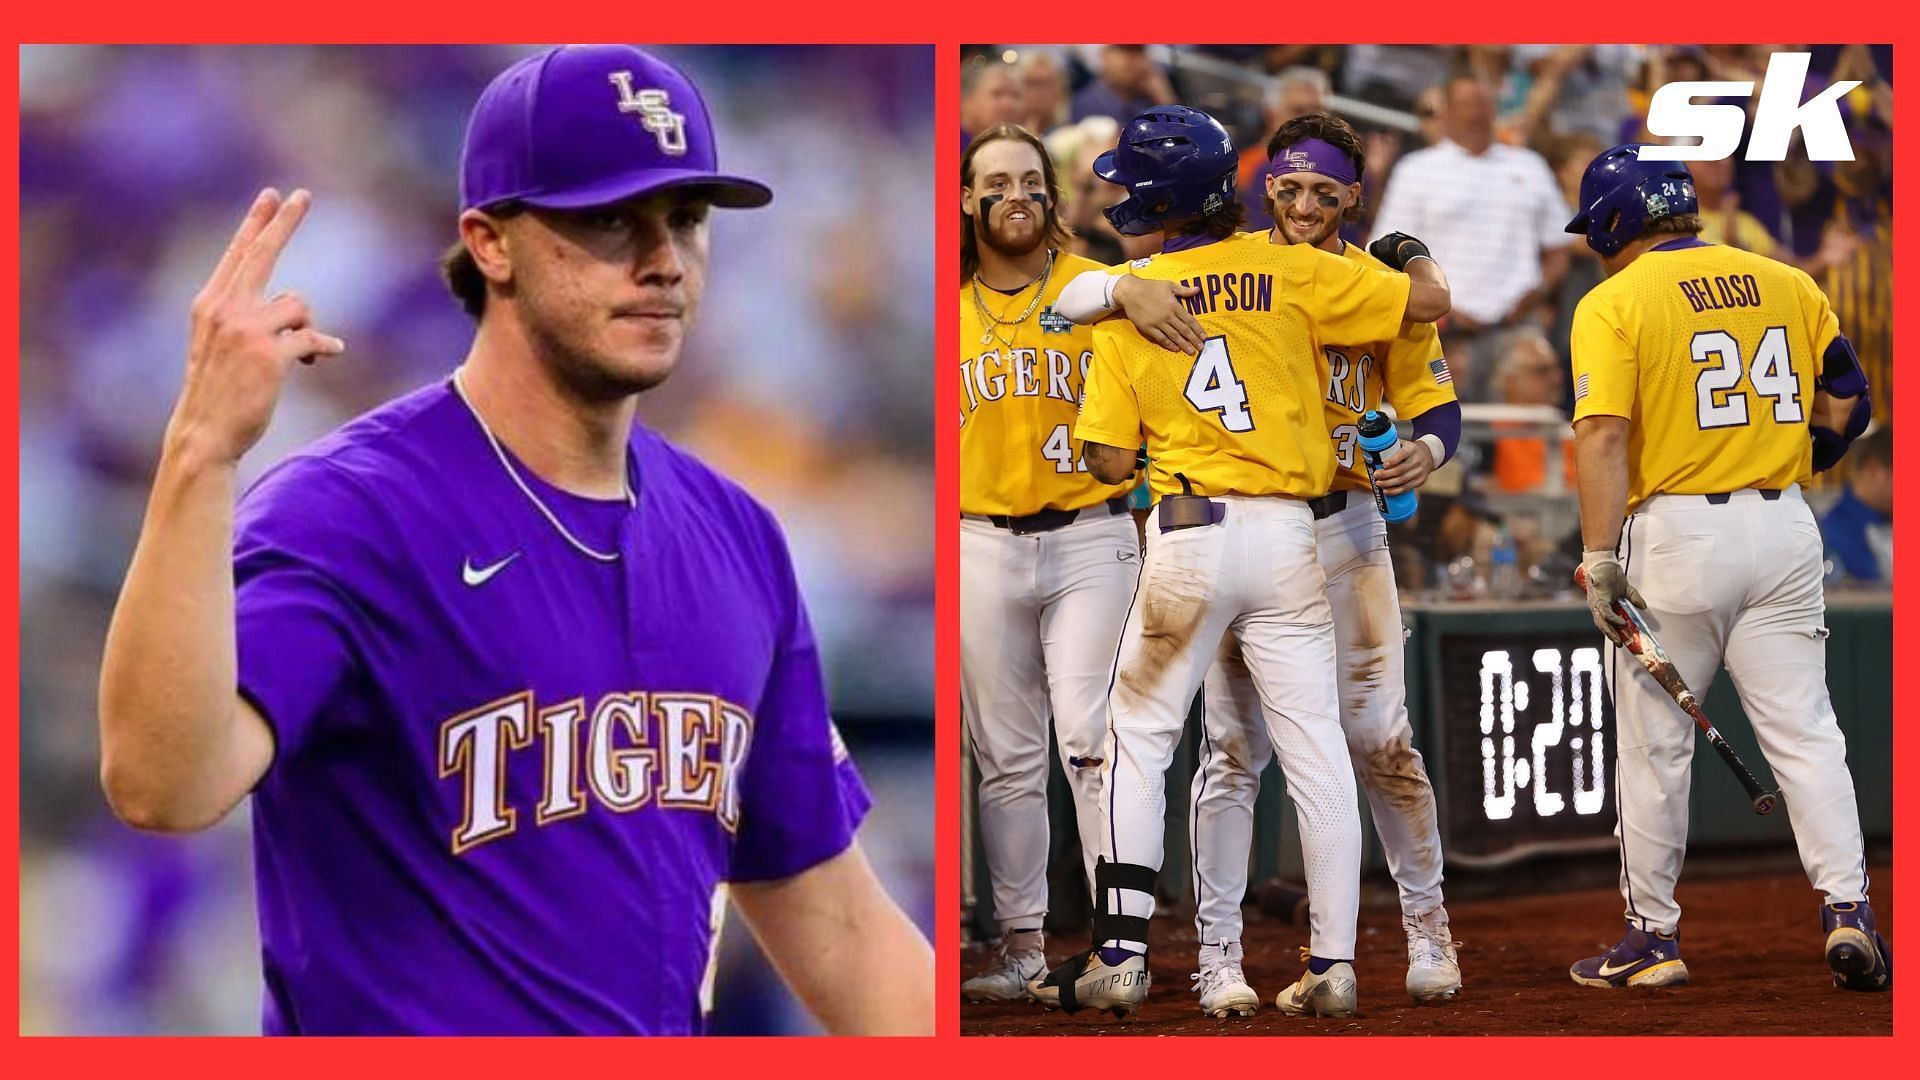 LSU baseball phenoms Paul Skenes and Dylan Crews were selected first overall at the 2023 MLB Draft